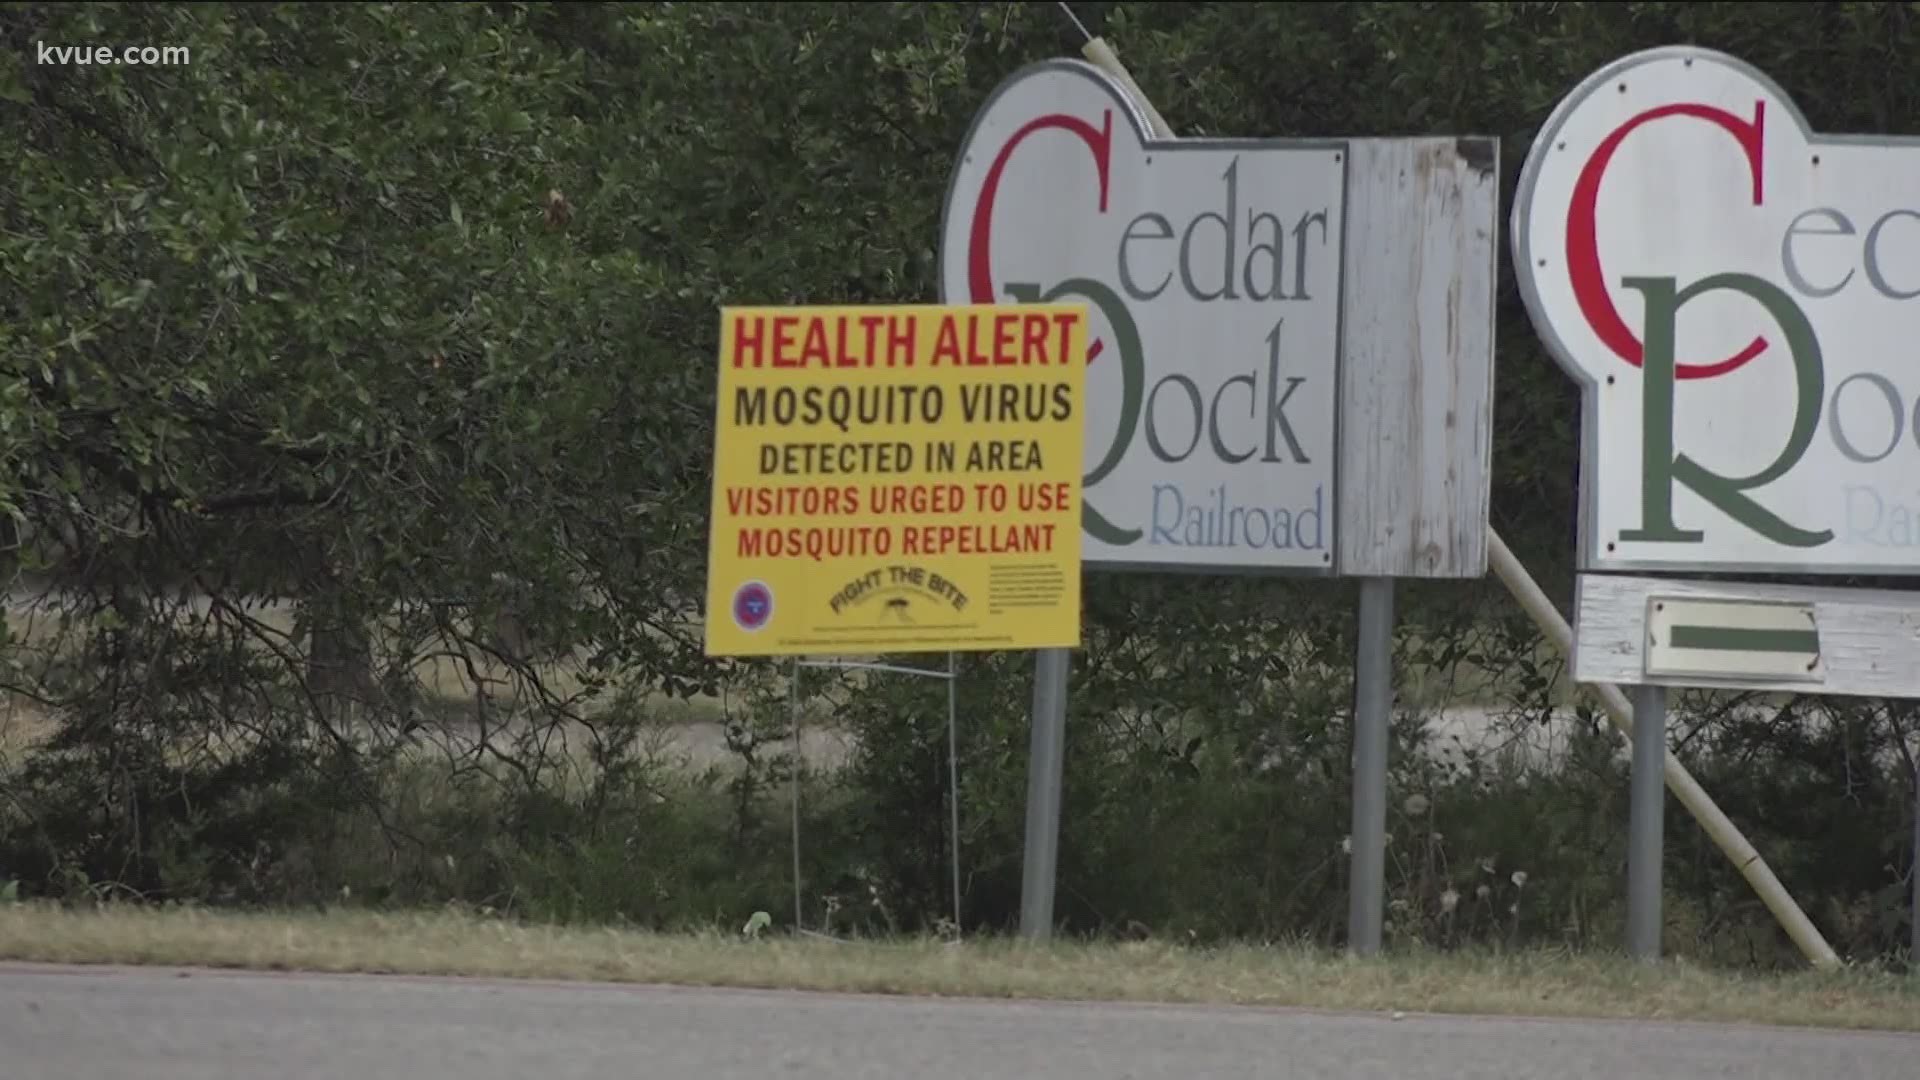 Williamson County officials told KVUE that if people who feel sick don't mention a mosquito bit them, West Nile may be confused for and labeled as COVID-19.